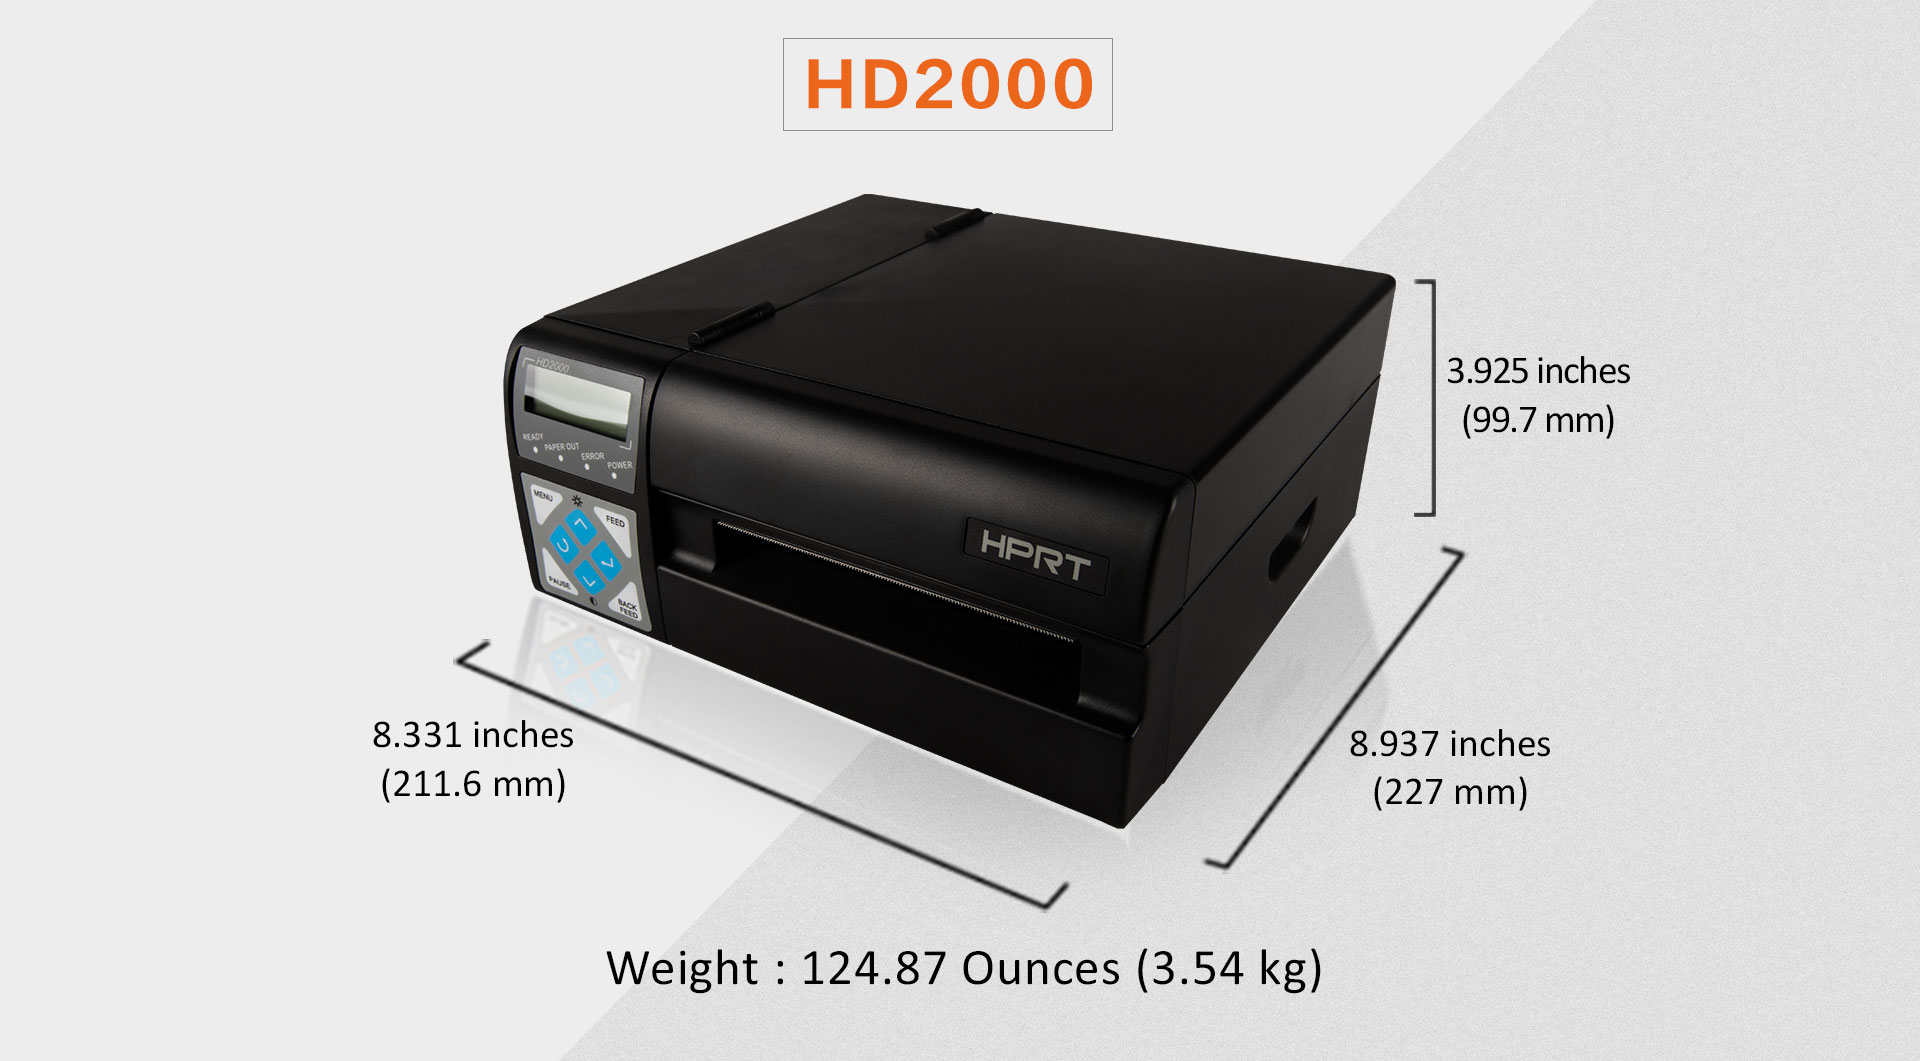 HPRT HD2000 sizes and weight